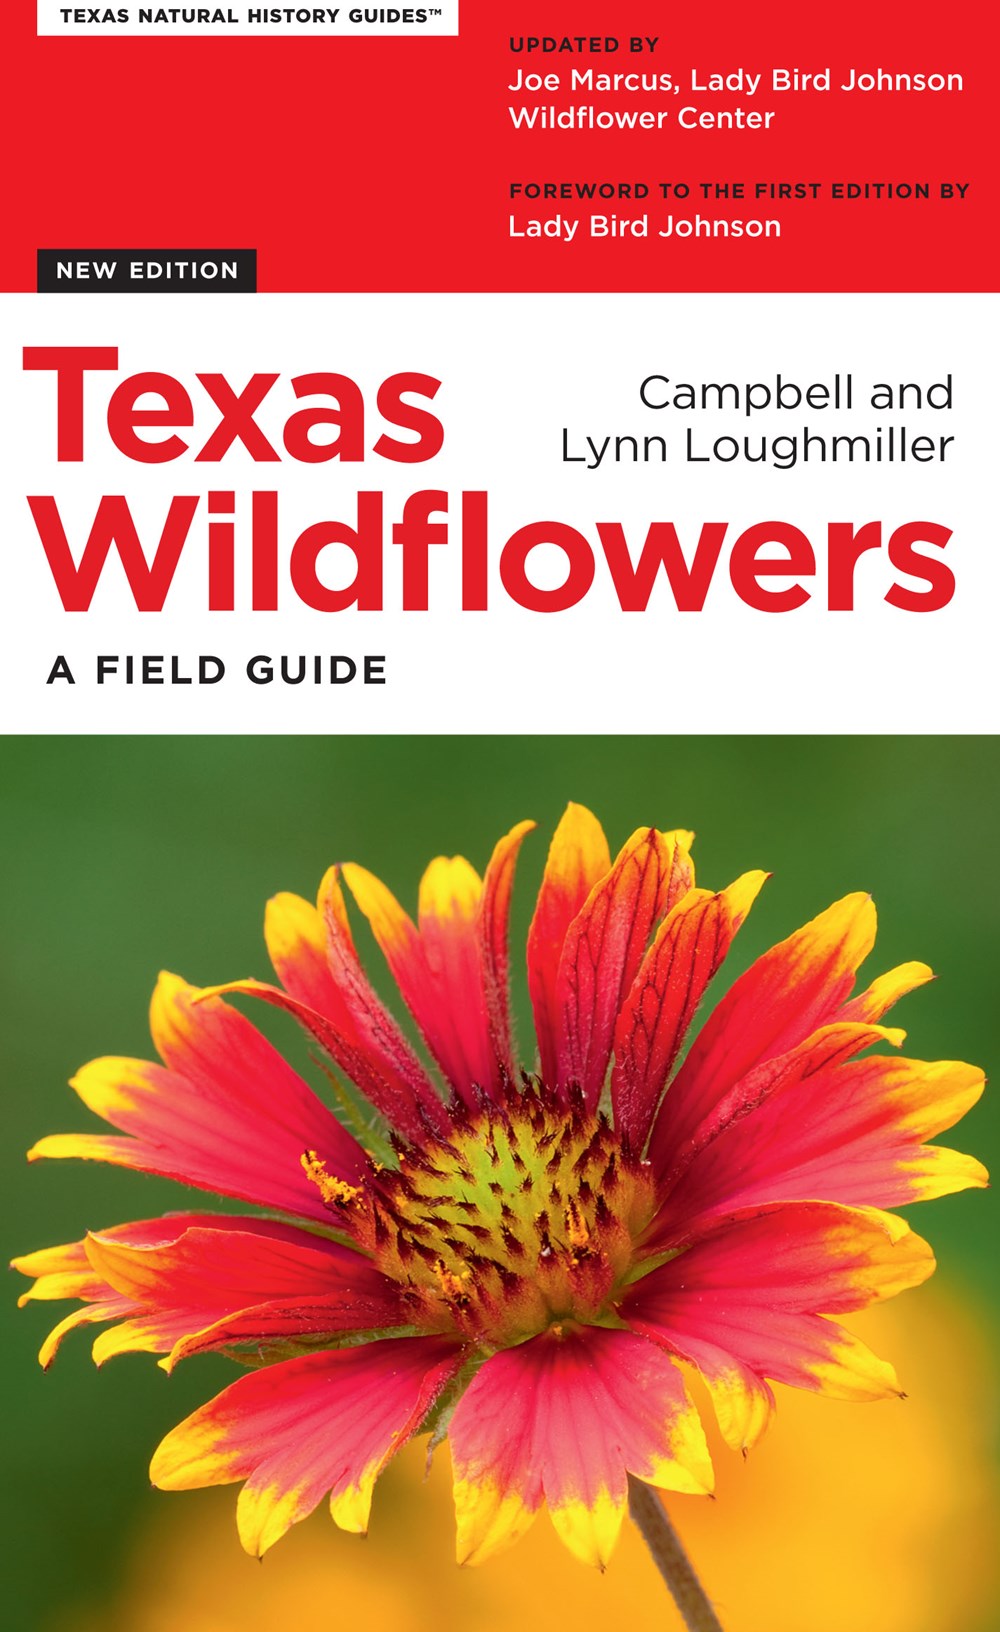 Texas Wildflowers : A Field Guide (3rd Edition)